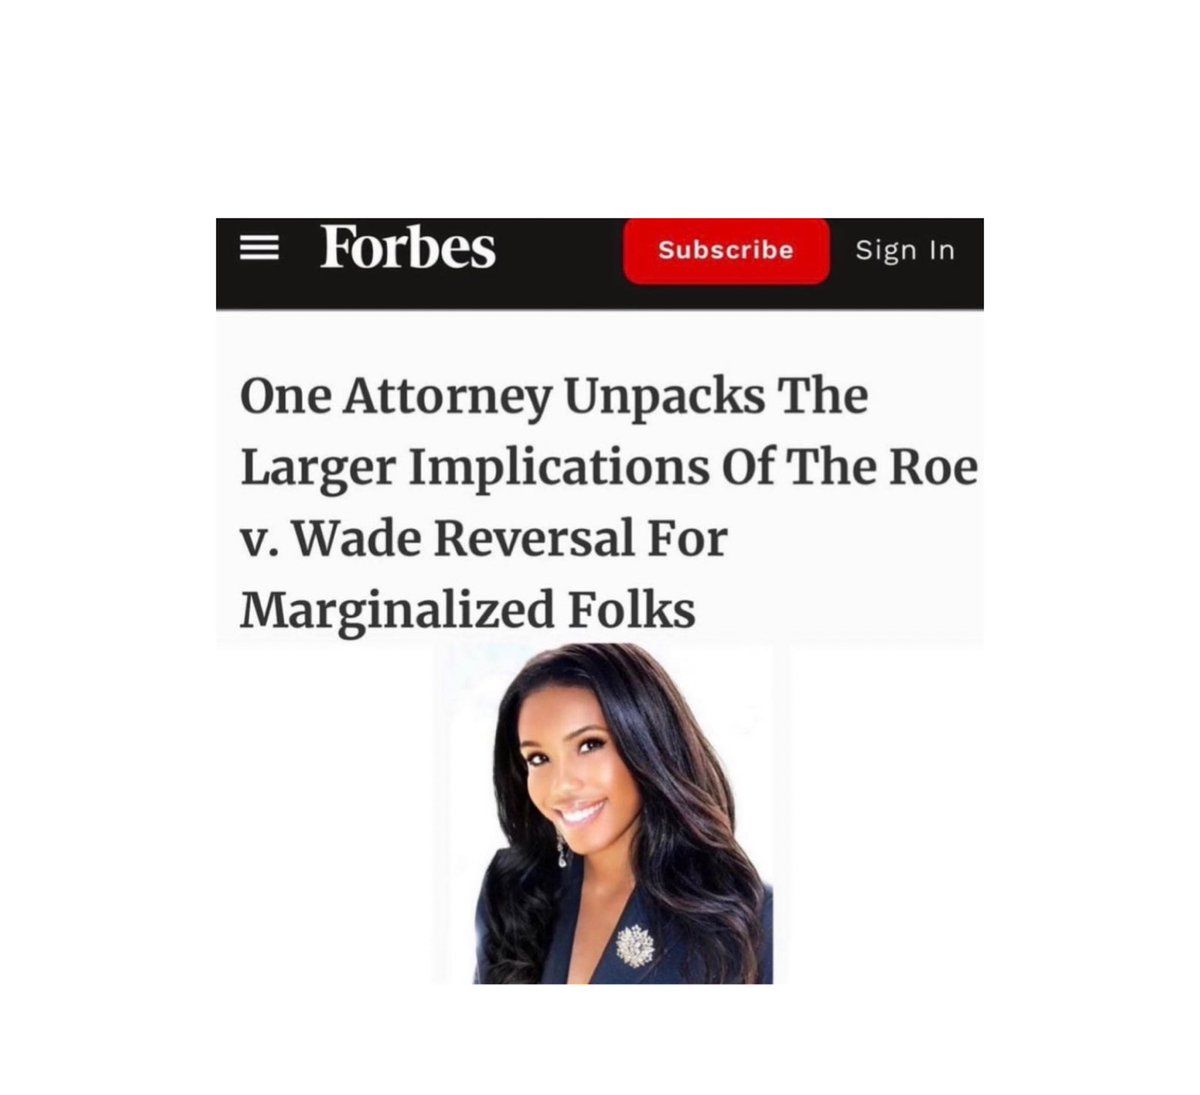 Welcome to our new page, our #WCW 🌹 shout out goes to our Principal J. Carter. You can read about her and our firm in the Forbes feature regarding the overturn of Roe v. Wade 👉🏽 forbes.com/sites/janicega… #lawtwitter #blacklawtwitter #lawfirm #lawyers